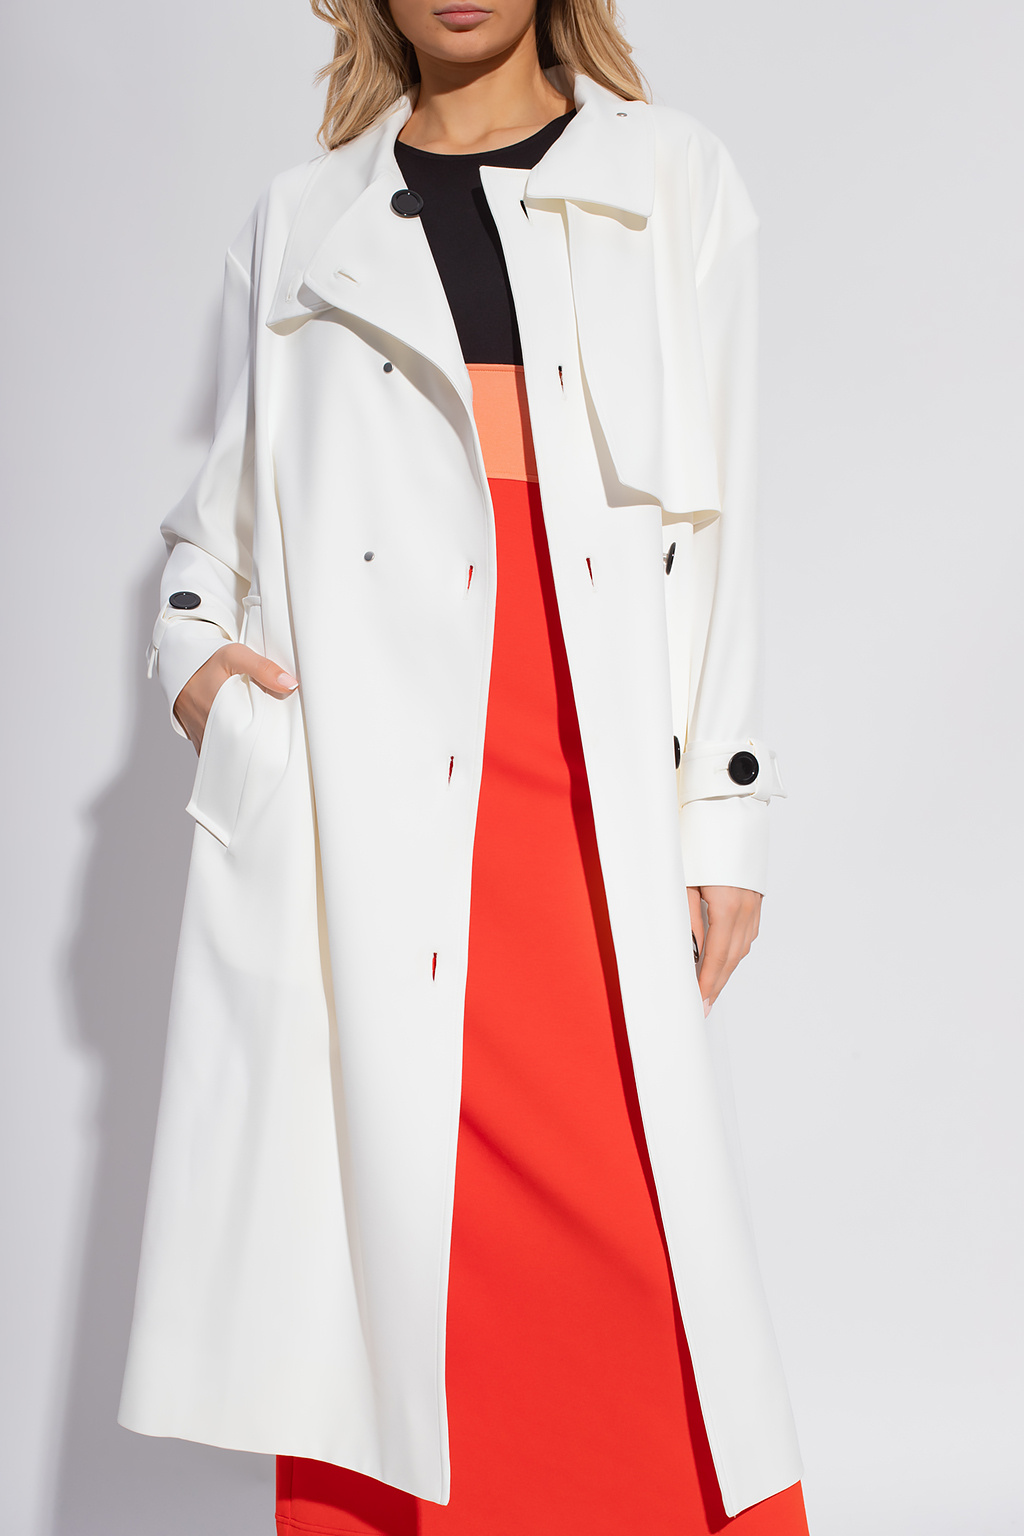 proenza culottes Schouler Belted trench coat